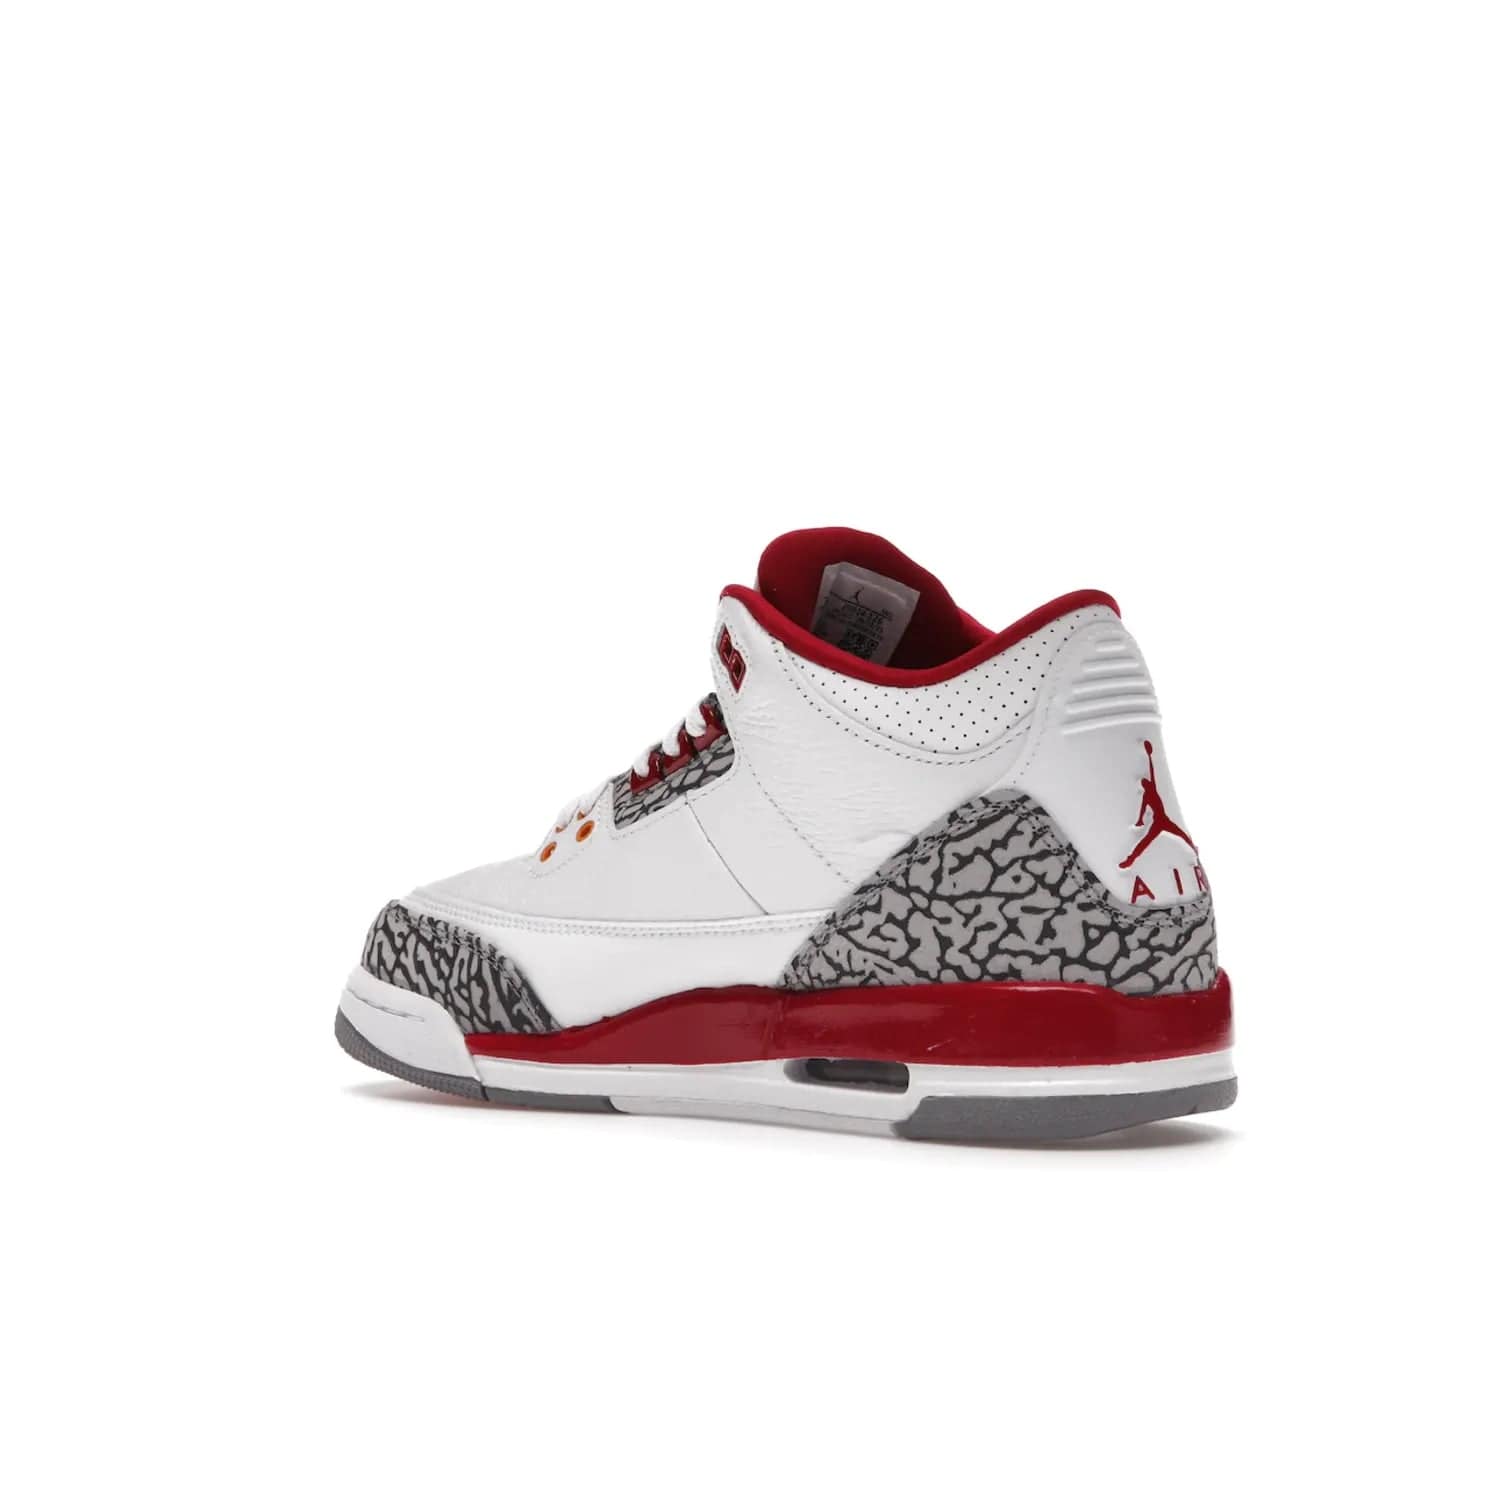 Jordan 3 Retro Cardinal (GS) - Image 23 - Only at www.BallersClubKickz.com - Shop the kid-sized Air Jordan 3 Retro Cardinal GS, released Feb 2022. White tumbled leather upper, light curry accenting, cement grey and classic red details throughout. Visible Air cushioning, midsole, and an eye-catching outsole. Show off your style with this fashionable streetwear silhouette.